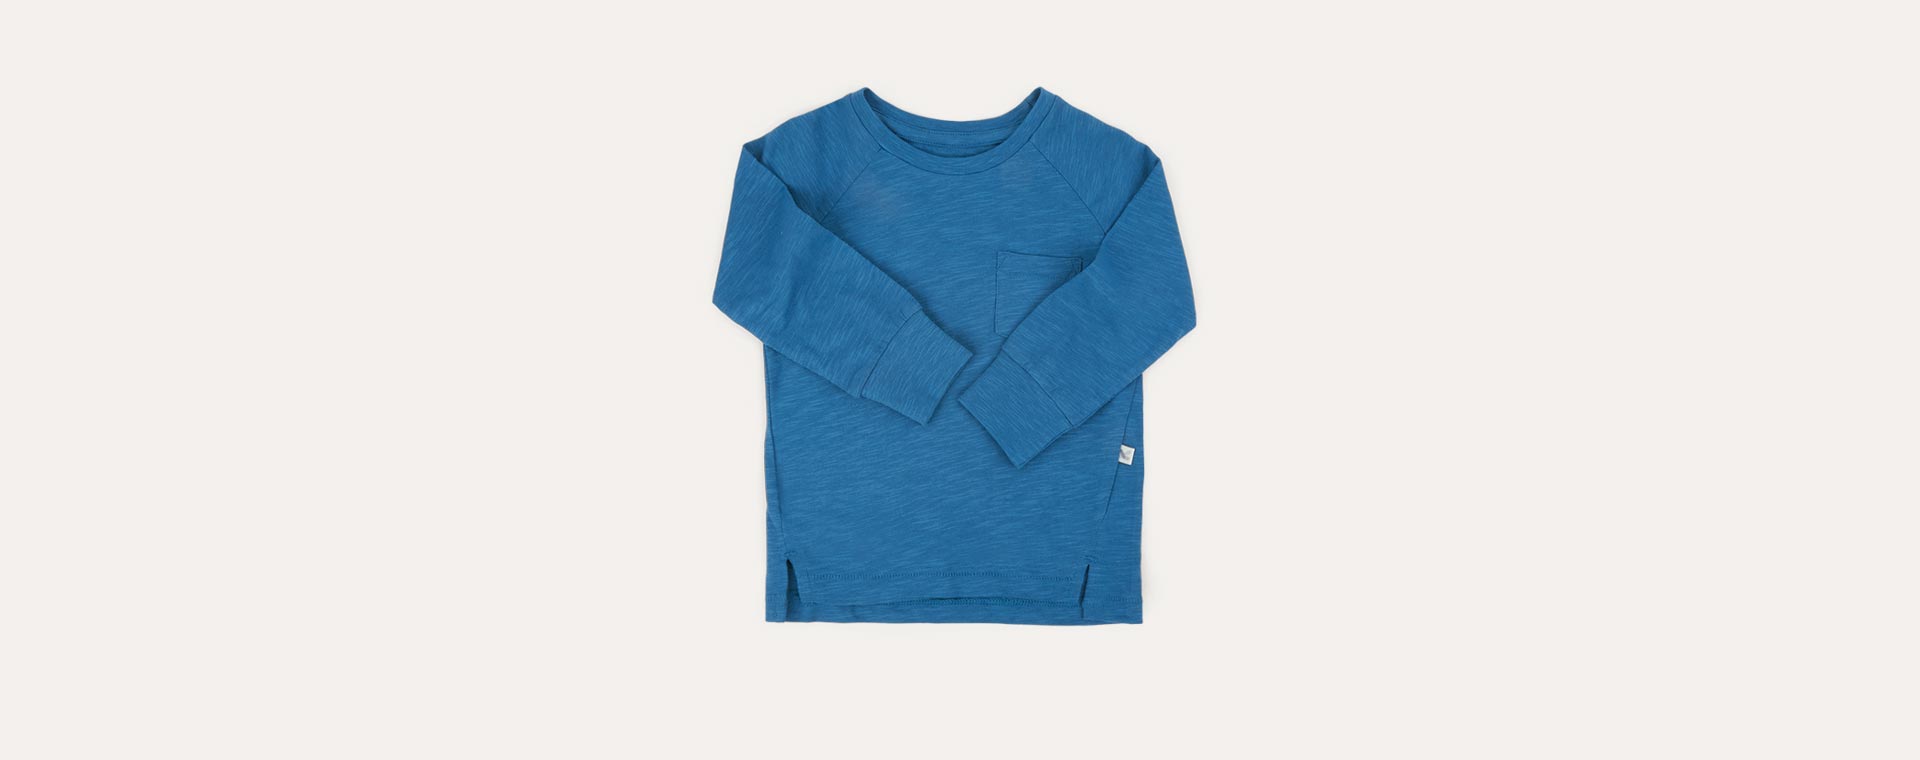 Cadet Blue KIDLY Label Perfect Long Sleeve Tee